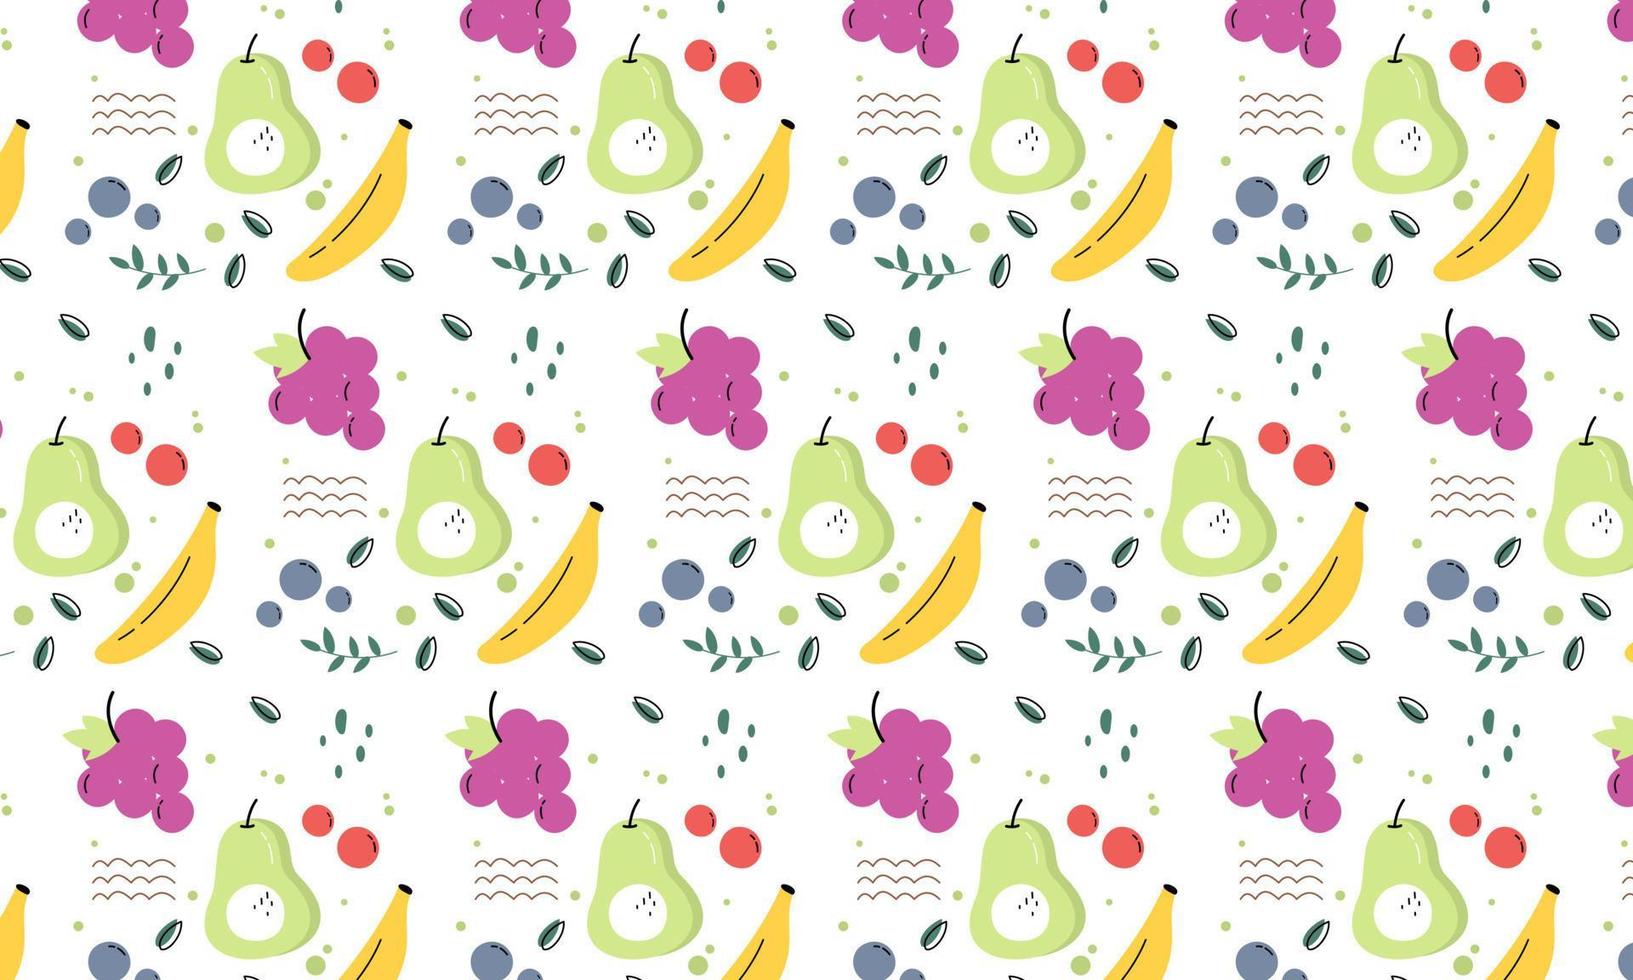 Seamless Pattern of Tropical Fruits Vector